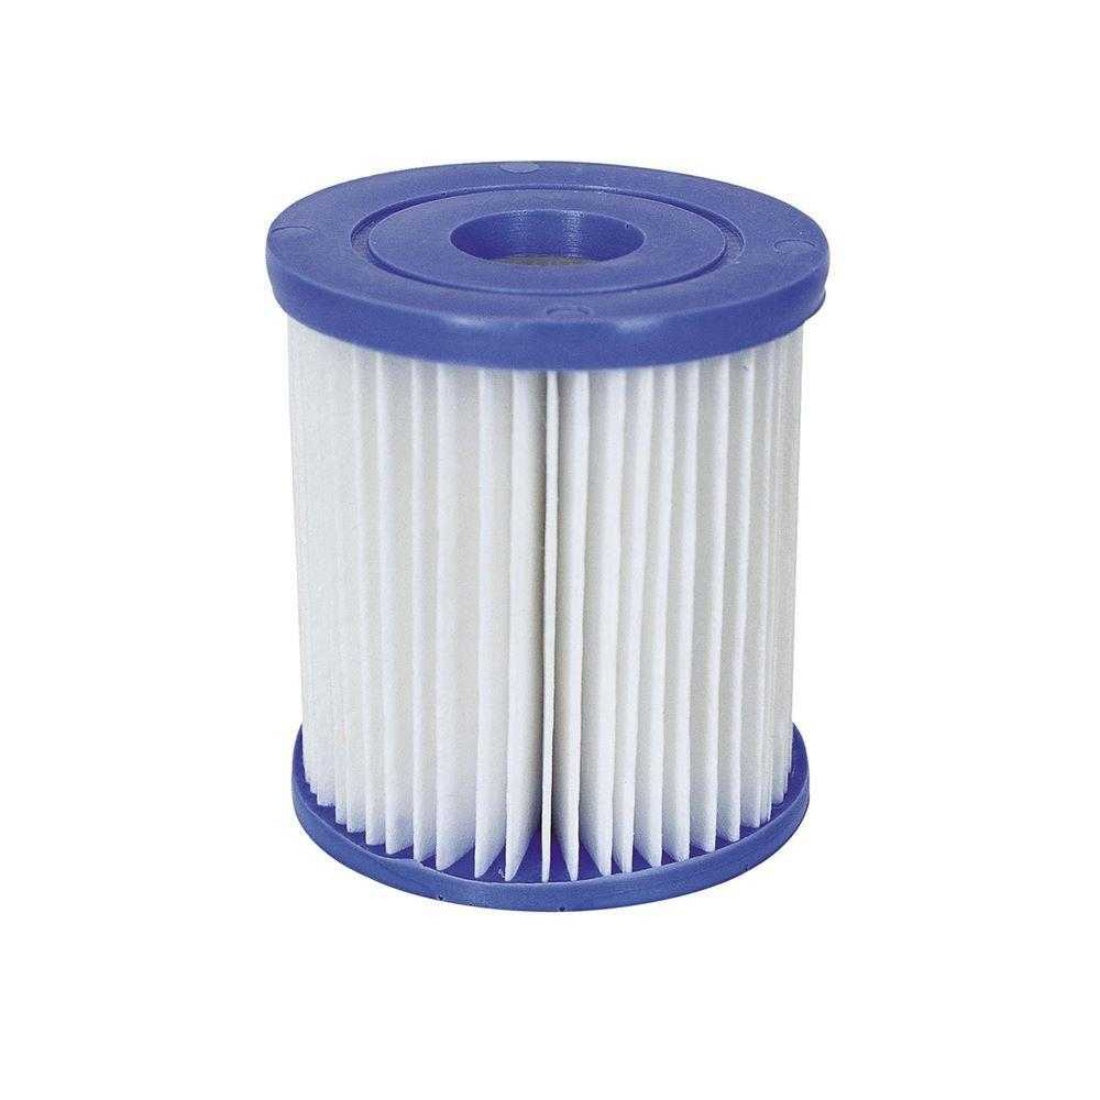 Bestway 6 x Filter Cartridge For Above Ground Swimming Pool 330 Gal/H Filter Pump